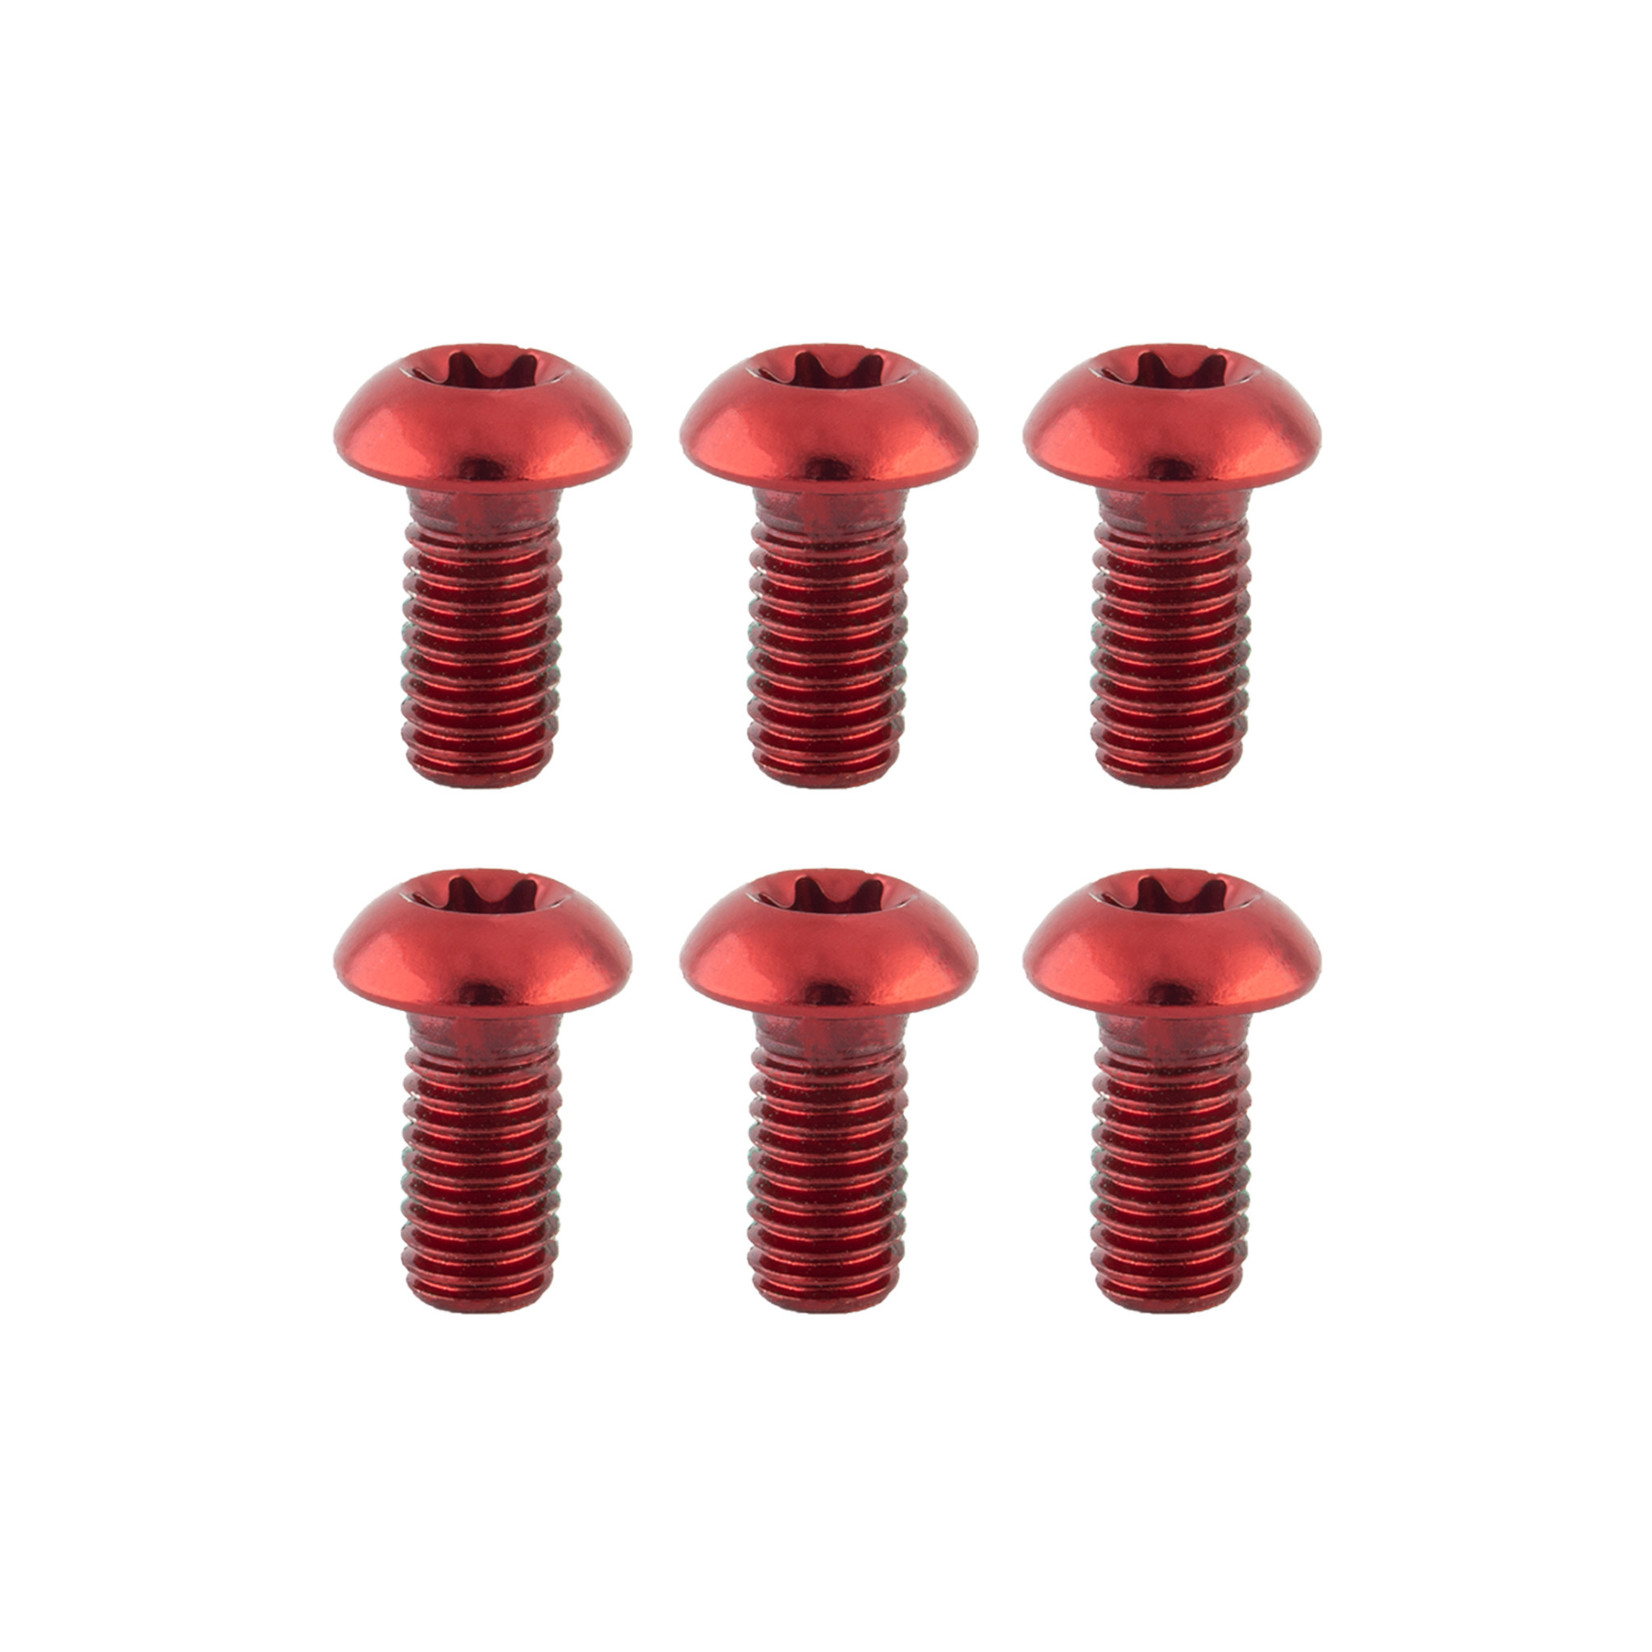 Clarks Clarks Anodized Rotor Bolts, Red